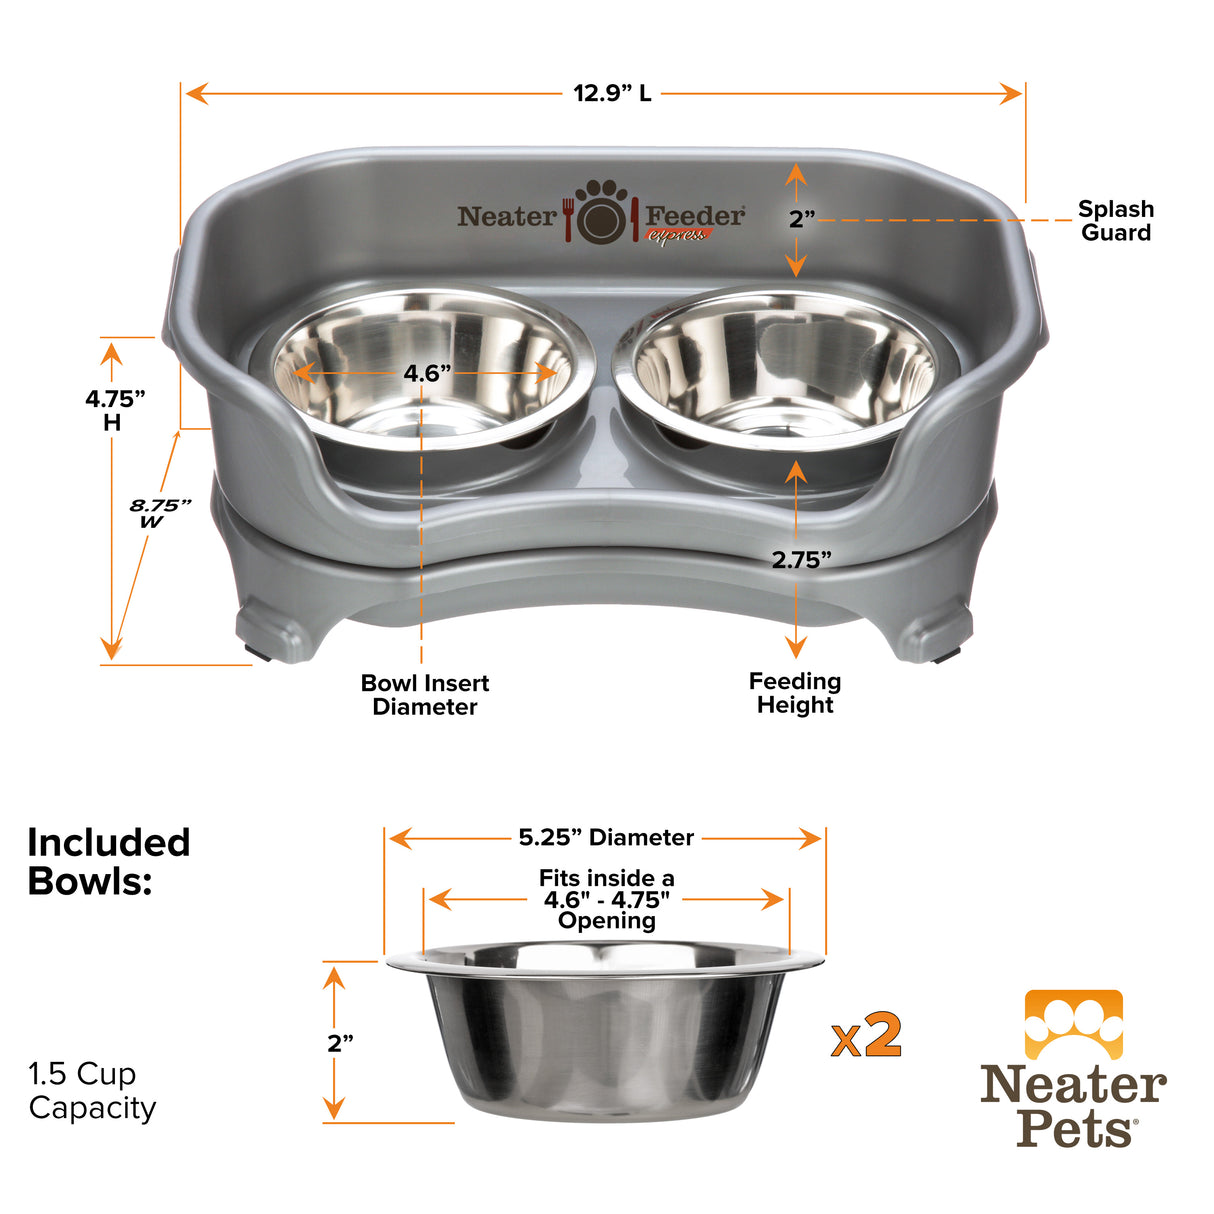 Stainless Steel Dog Bowl with Rubber Rim by Pets Stop